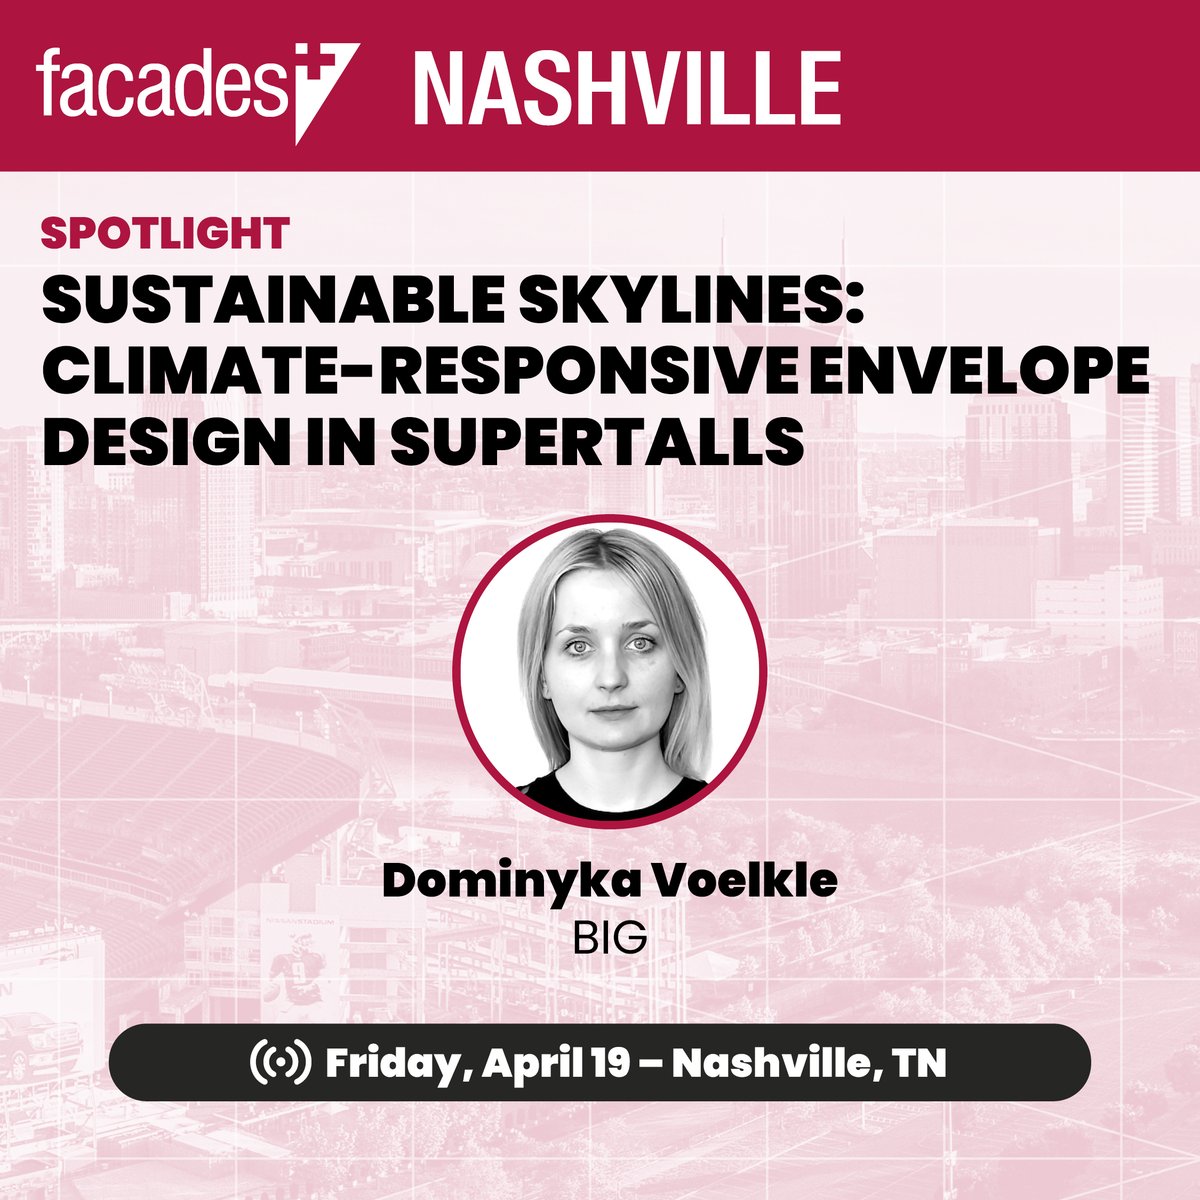 Next month, join us on April 19th for AN's inaugural Facades+conference in Nashville! Come listen to our spotlight panel speaker, discuss 'Sustainable Skylines: Climate-Responsive Envelope Design in Supertalls.' Register NOW at facadesplus.com/nashville/